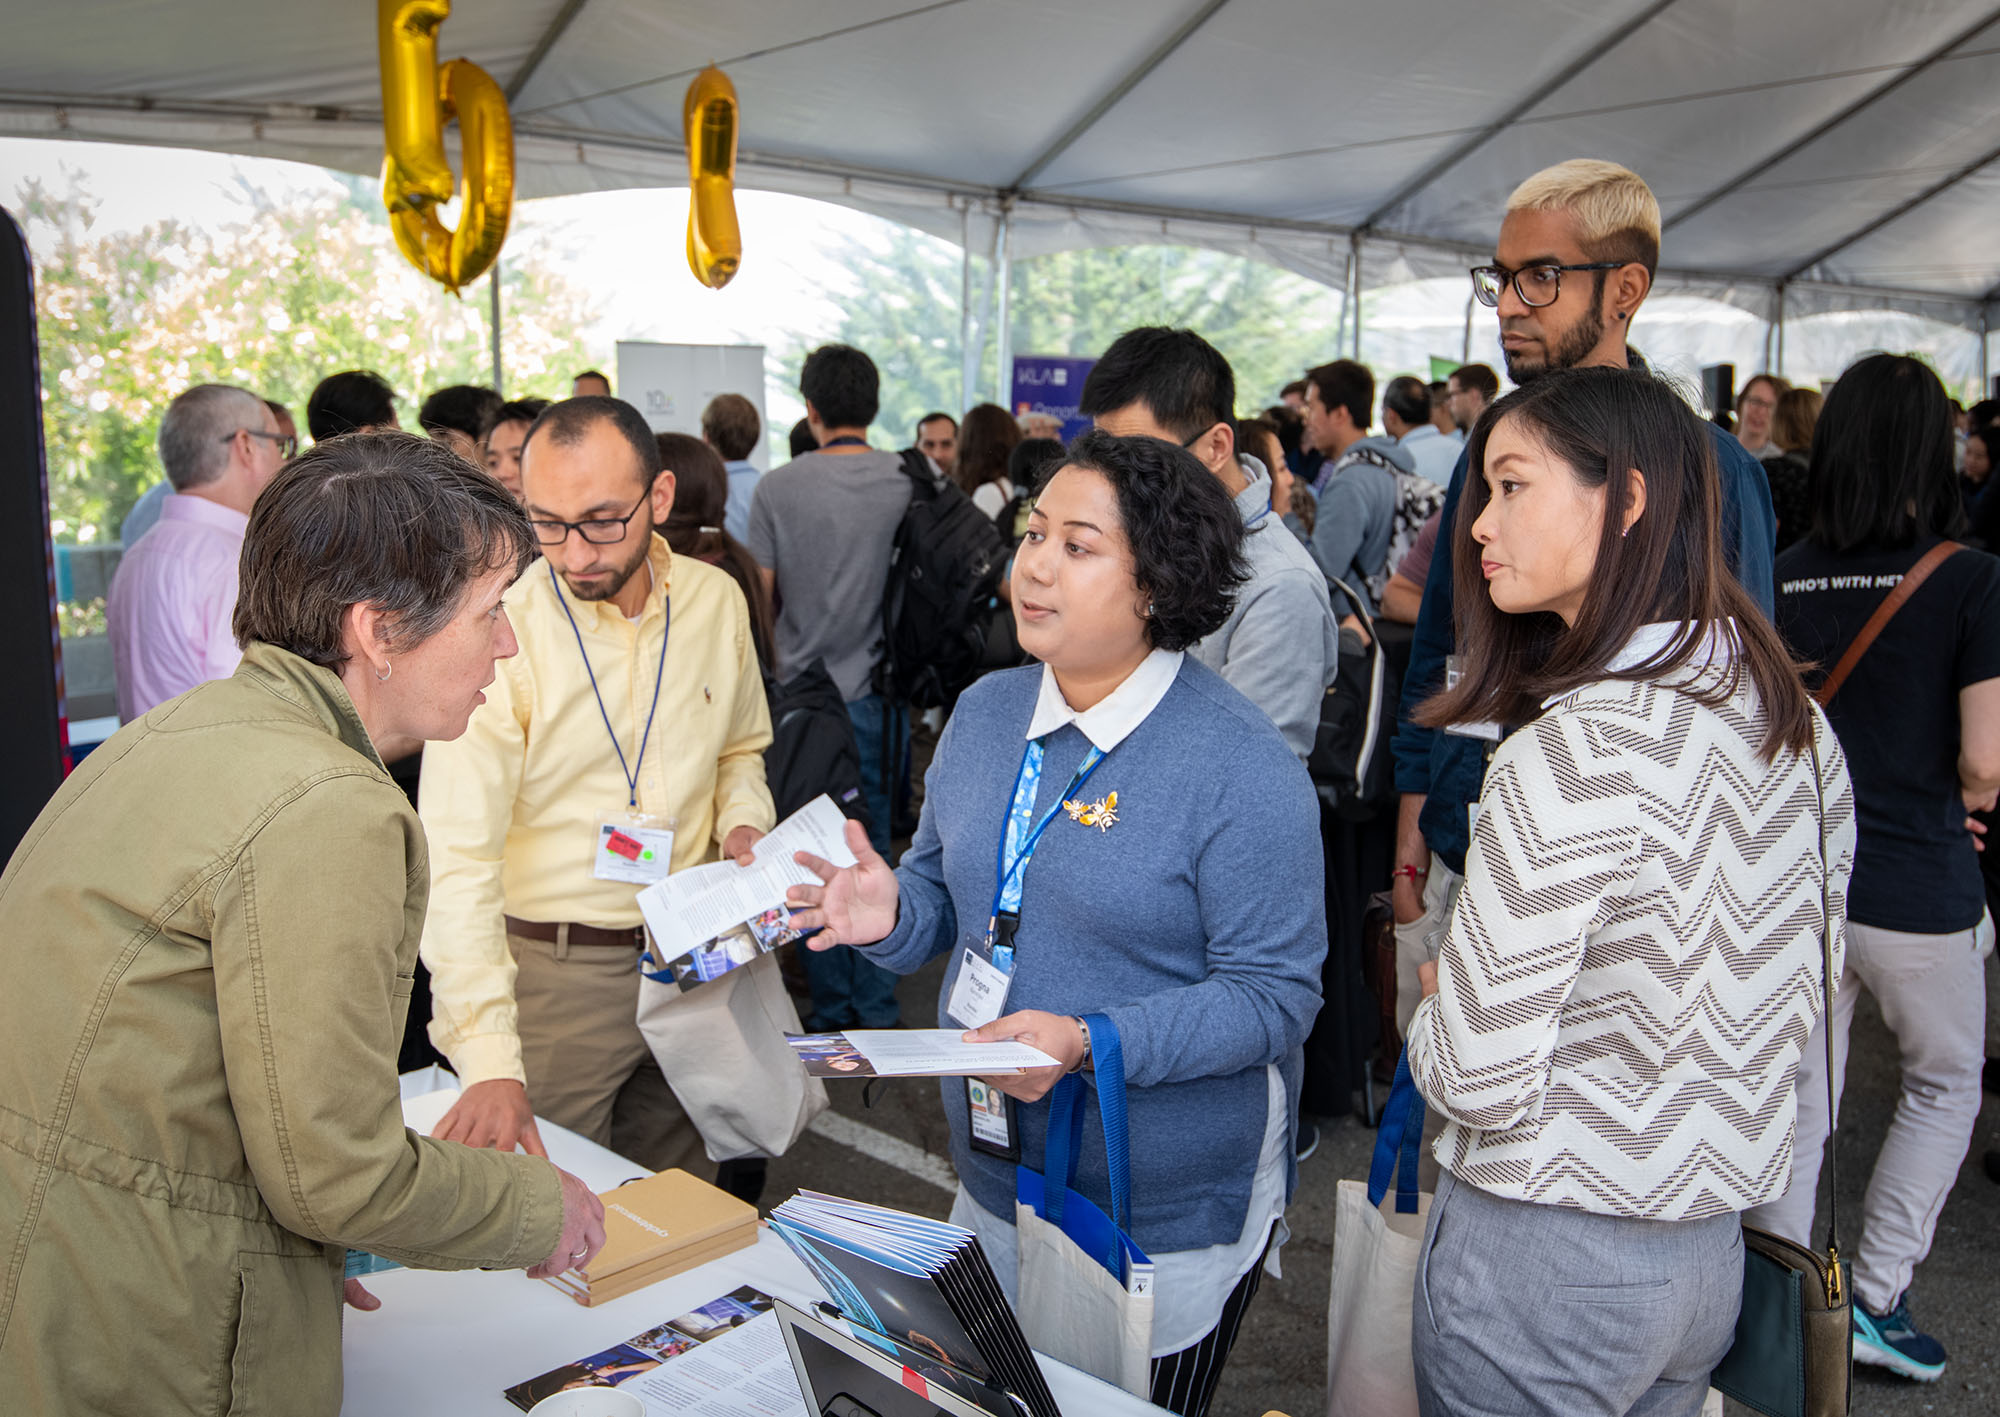 A group of postdocs converse with a presenter at an outdoor postdoc networking event.